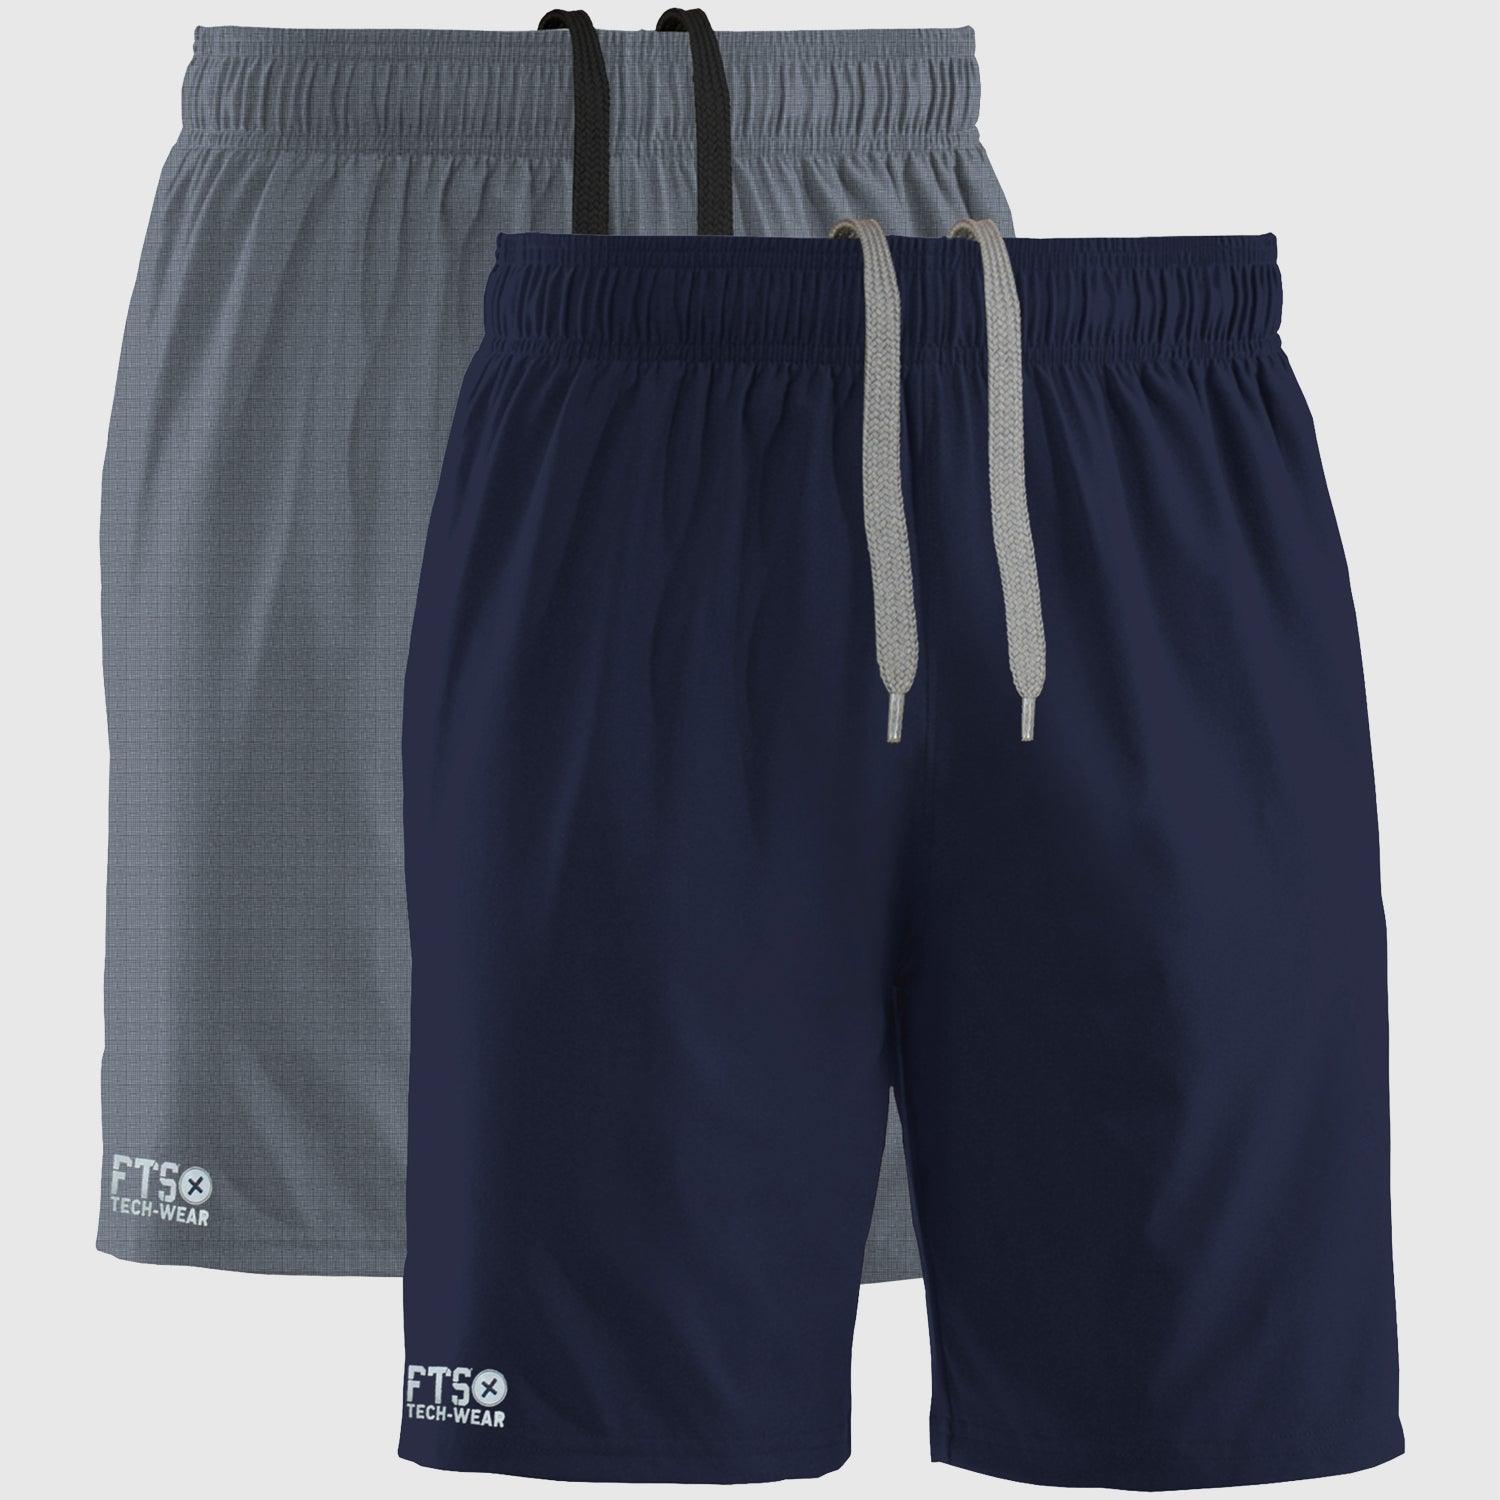 Shorts 100% Polyester 100% POLYESTER | NAVY - ROYAL Pack of 2 – FTS